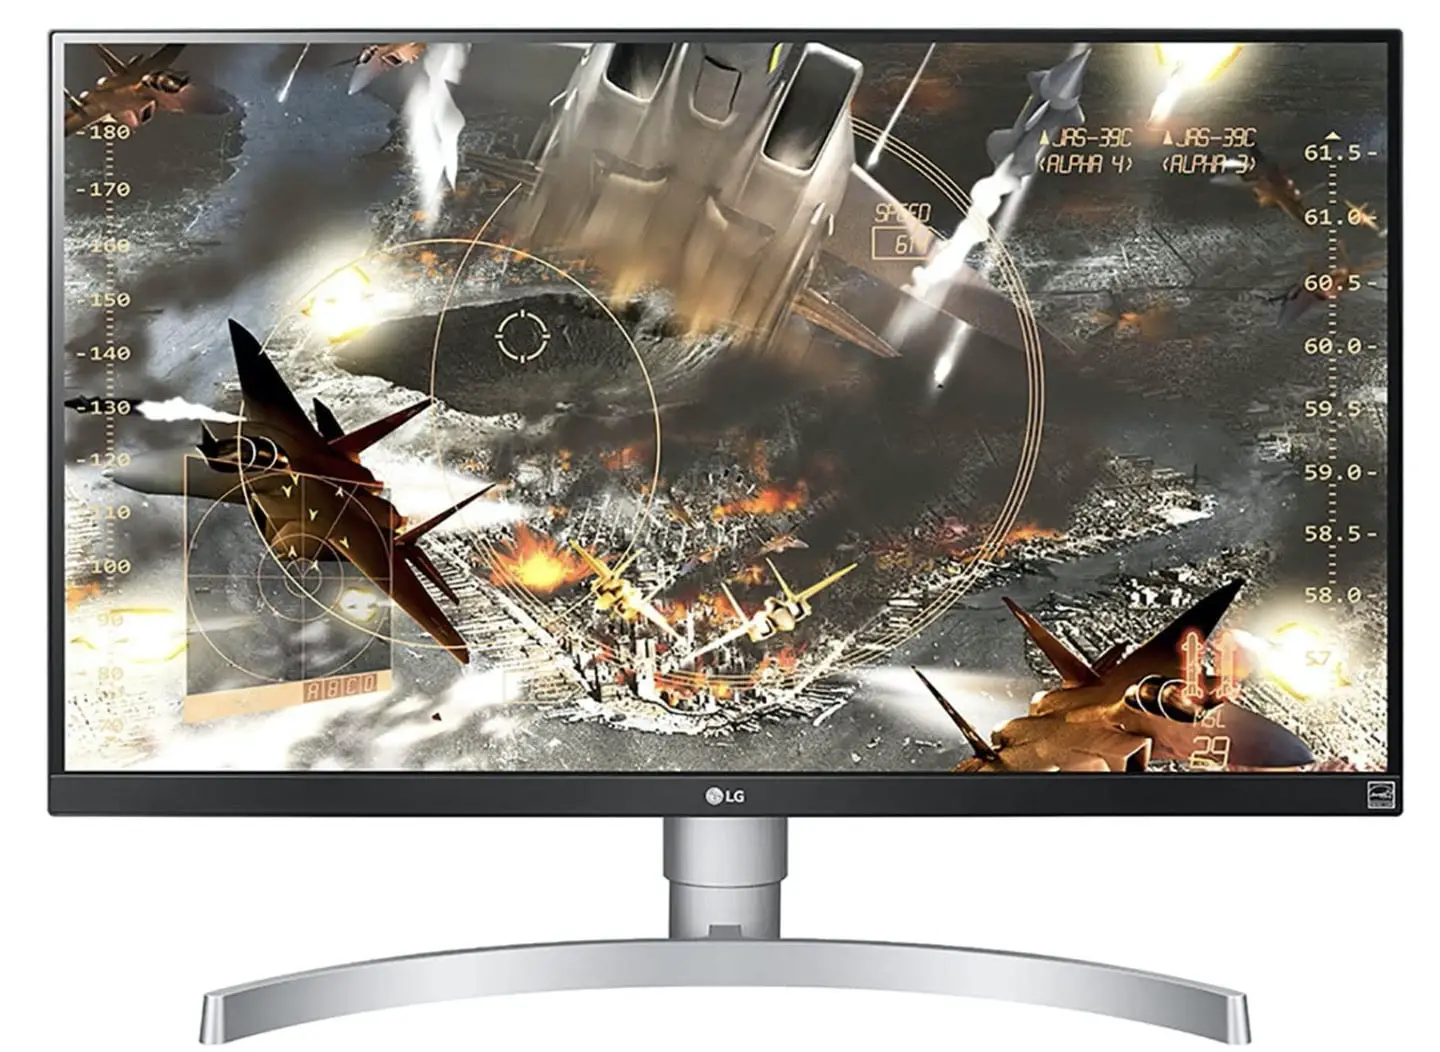 11 Of The Best Monitors For PS5 in 2022 - Reviewed